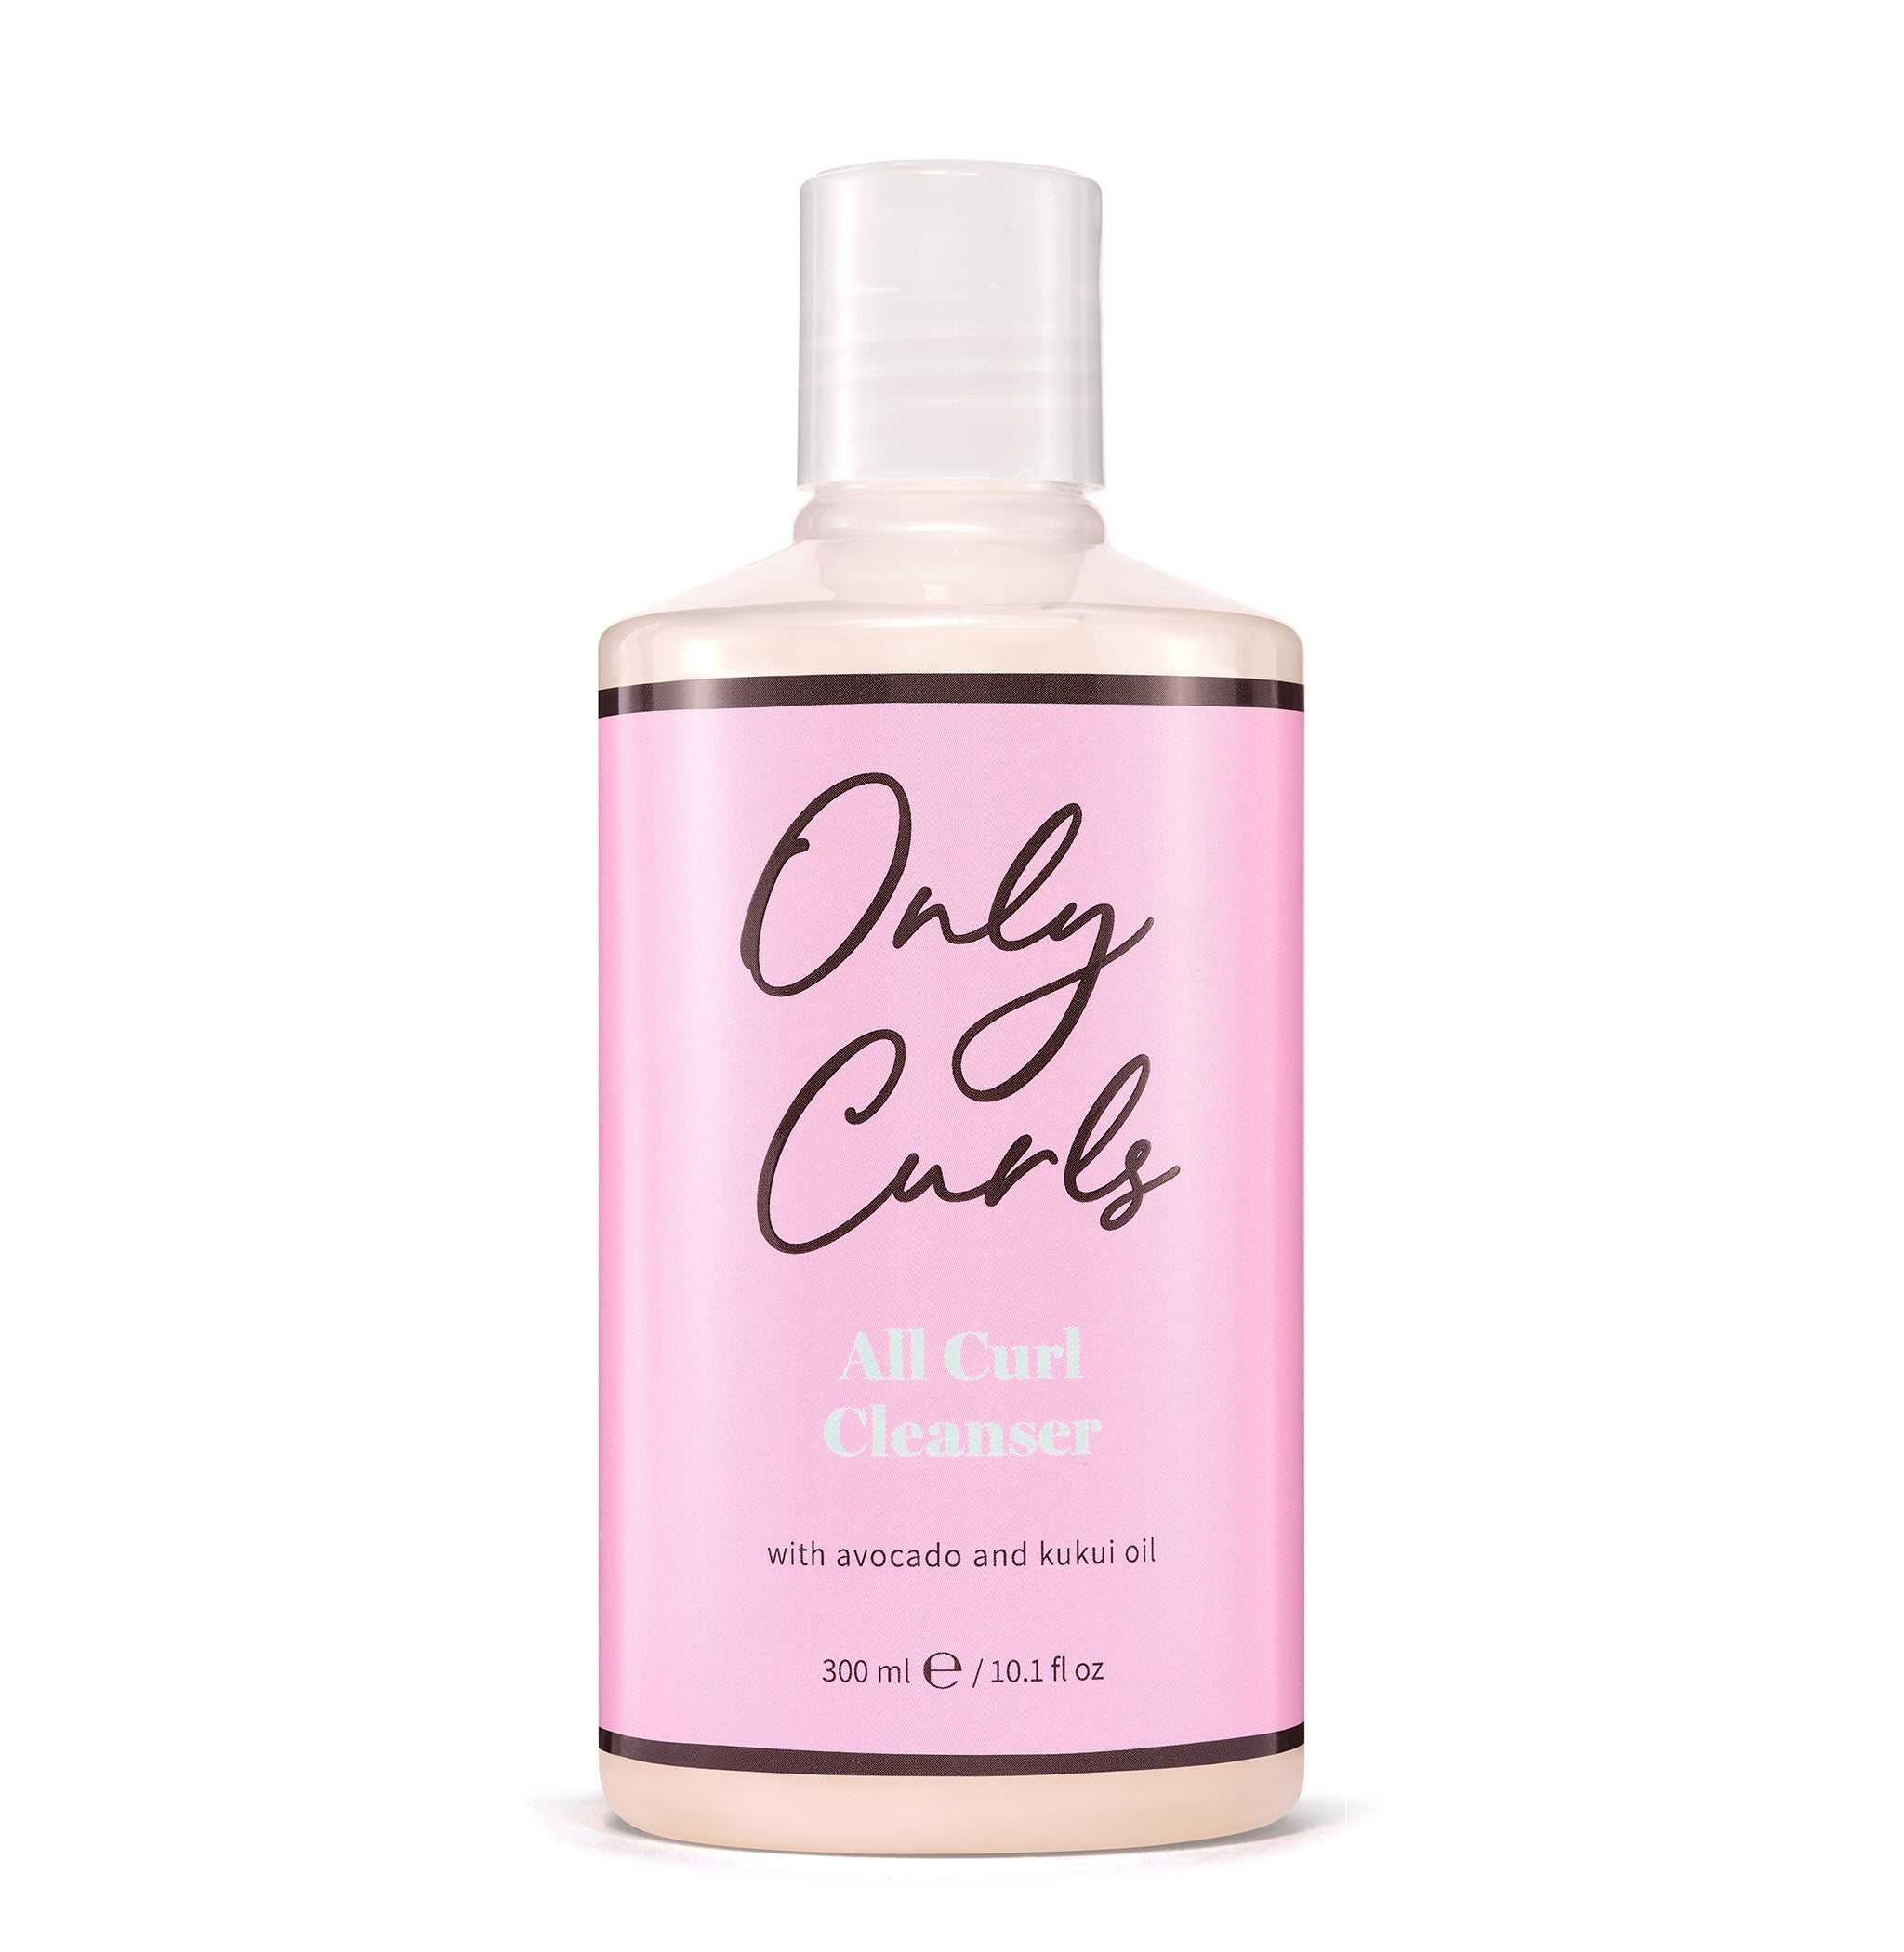 Only Curls All Curl Cleanser, 300ml | Curls